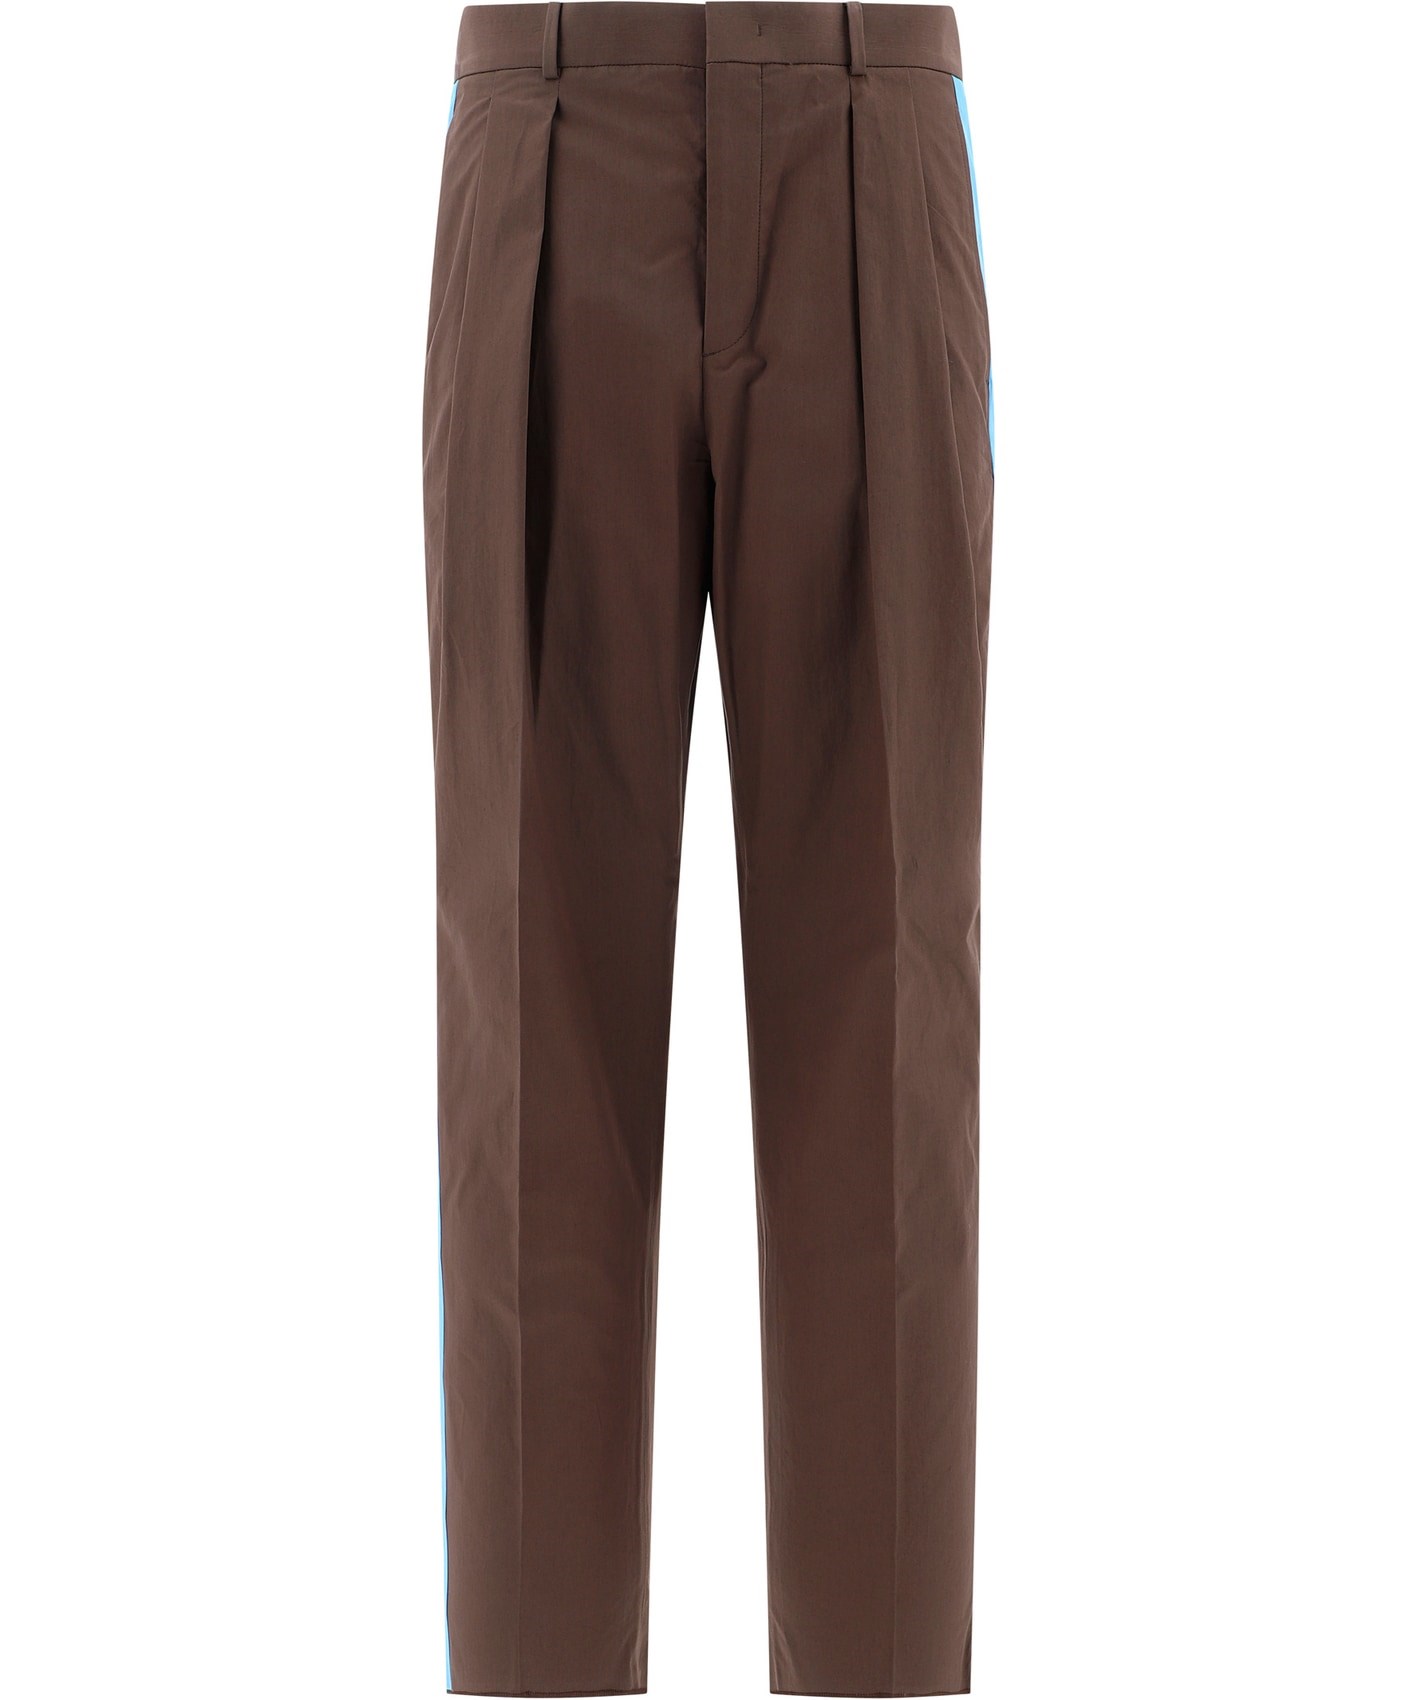 【Valentino】Pants with side band